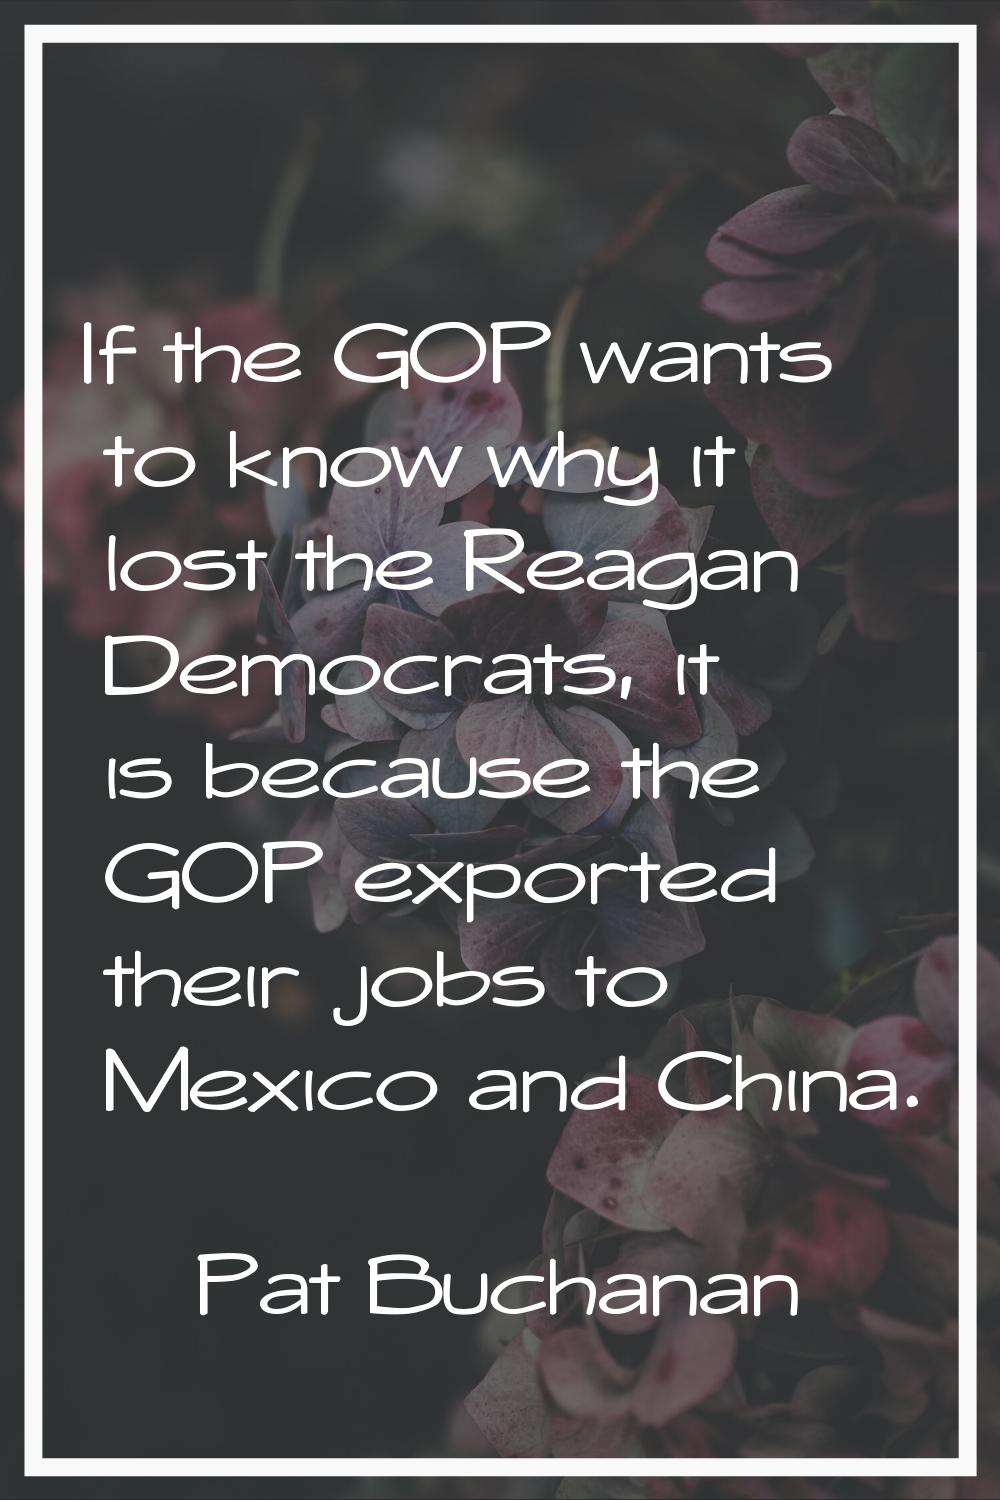 If the GOP wants to know why it lost the Reagan Democrats, it is because the GOP exported their job